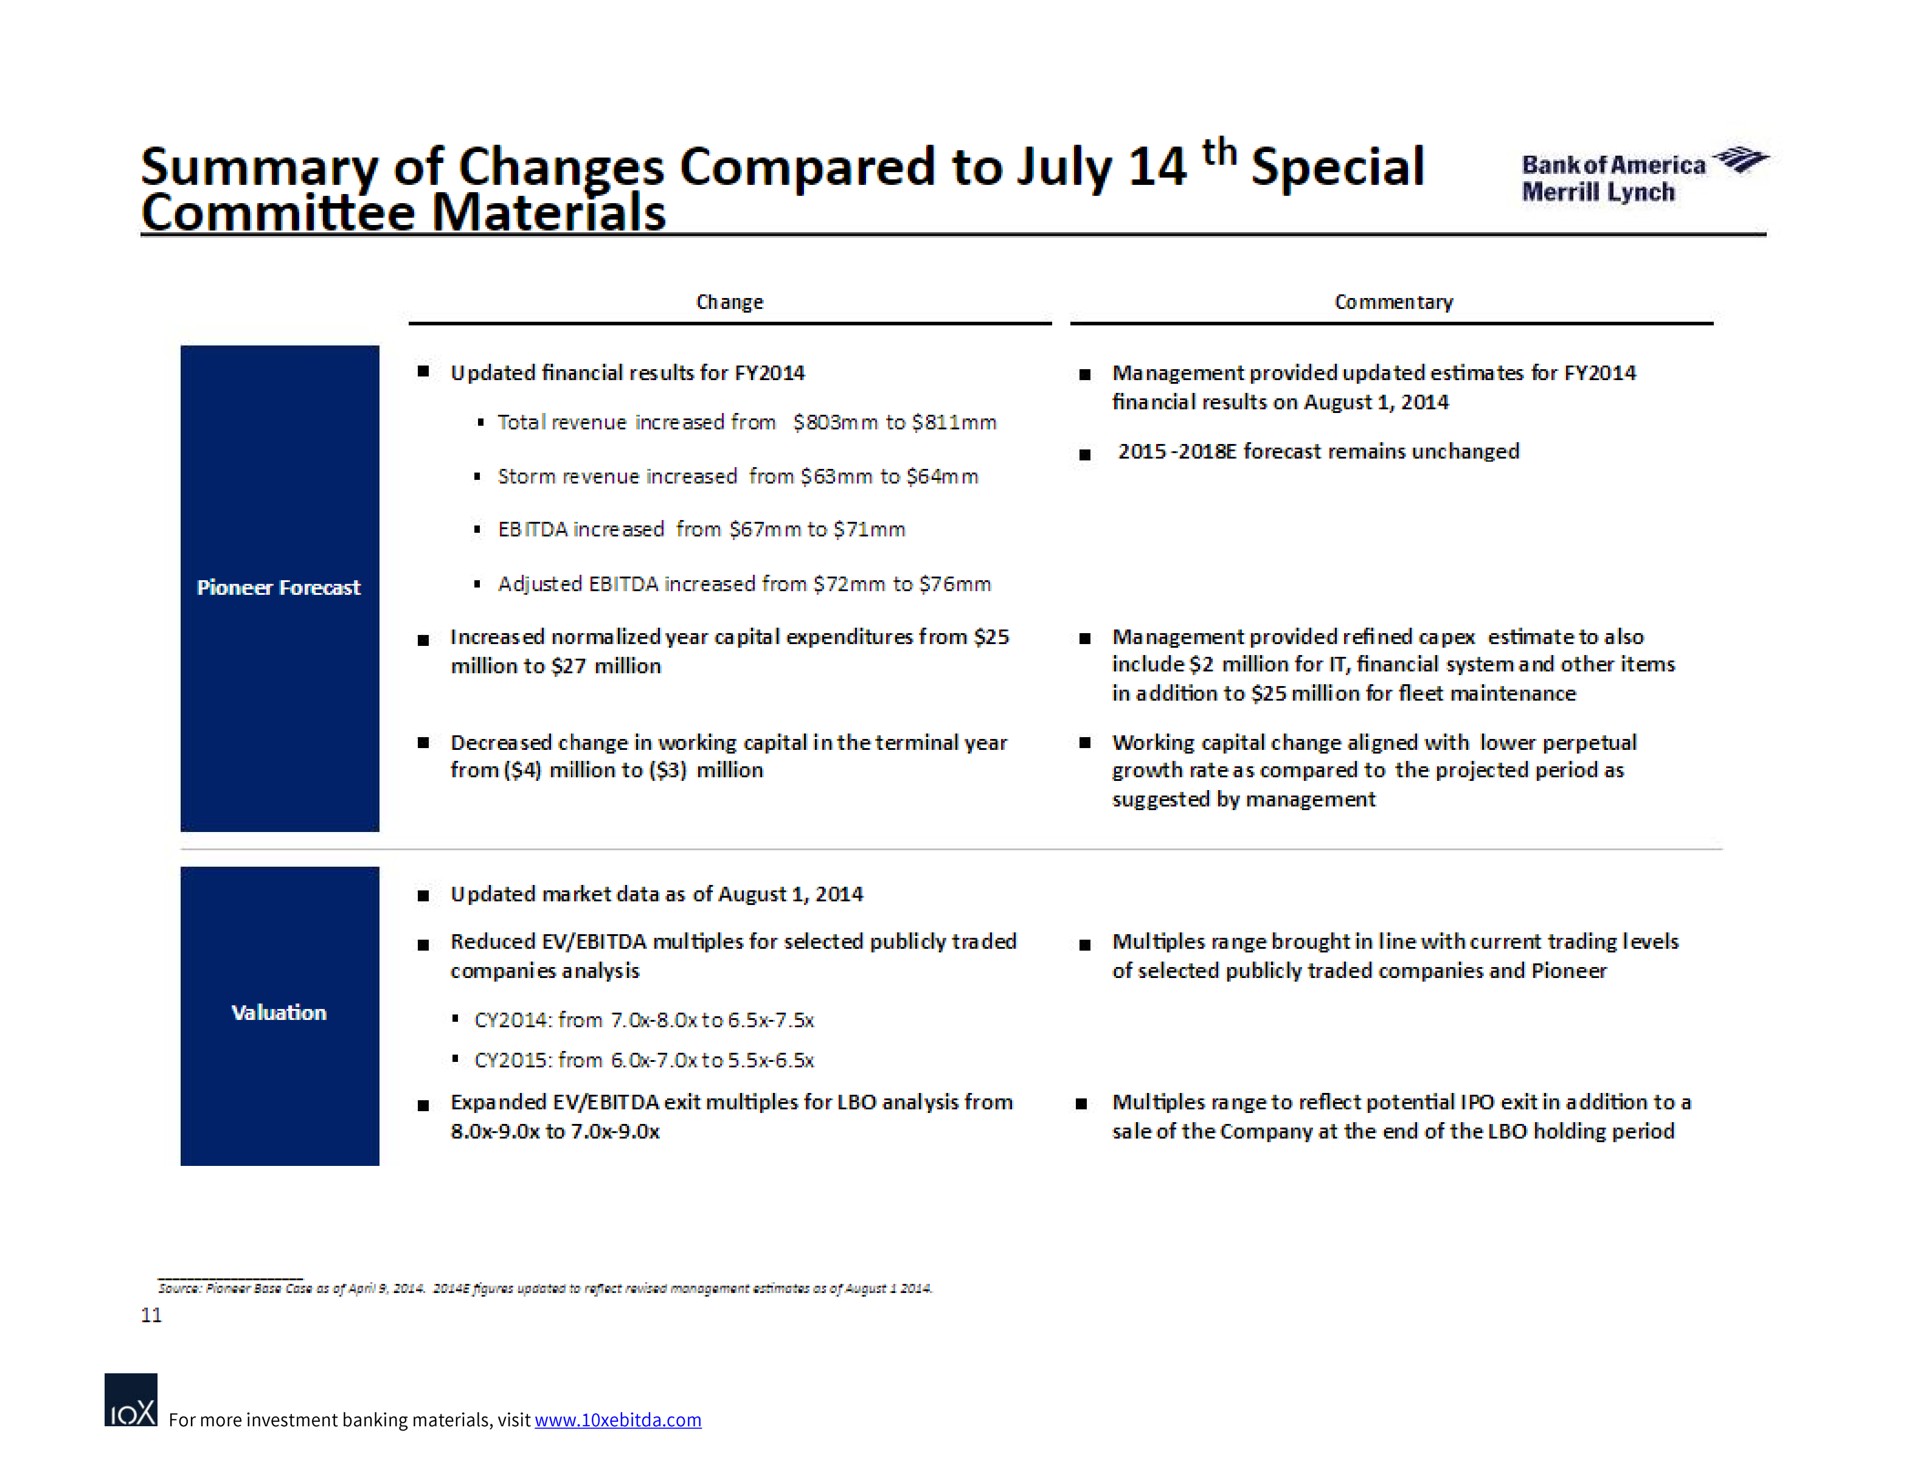 summary of changes compared to special committee materials | Bank of America